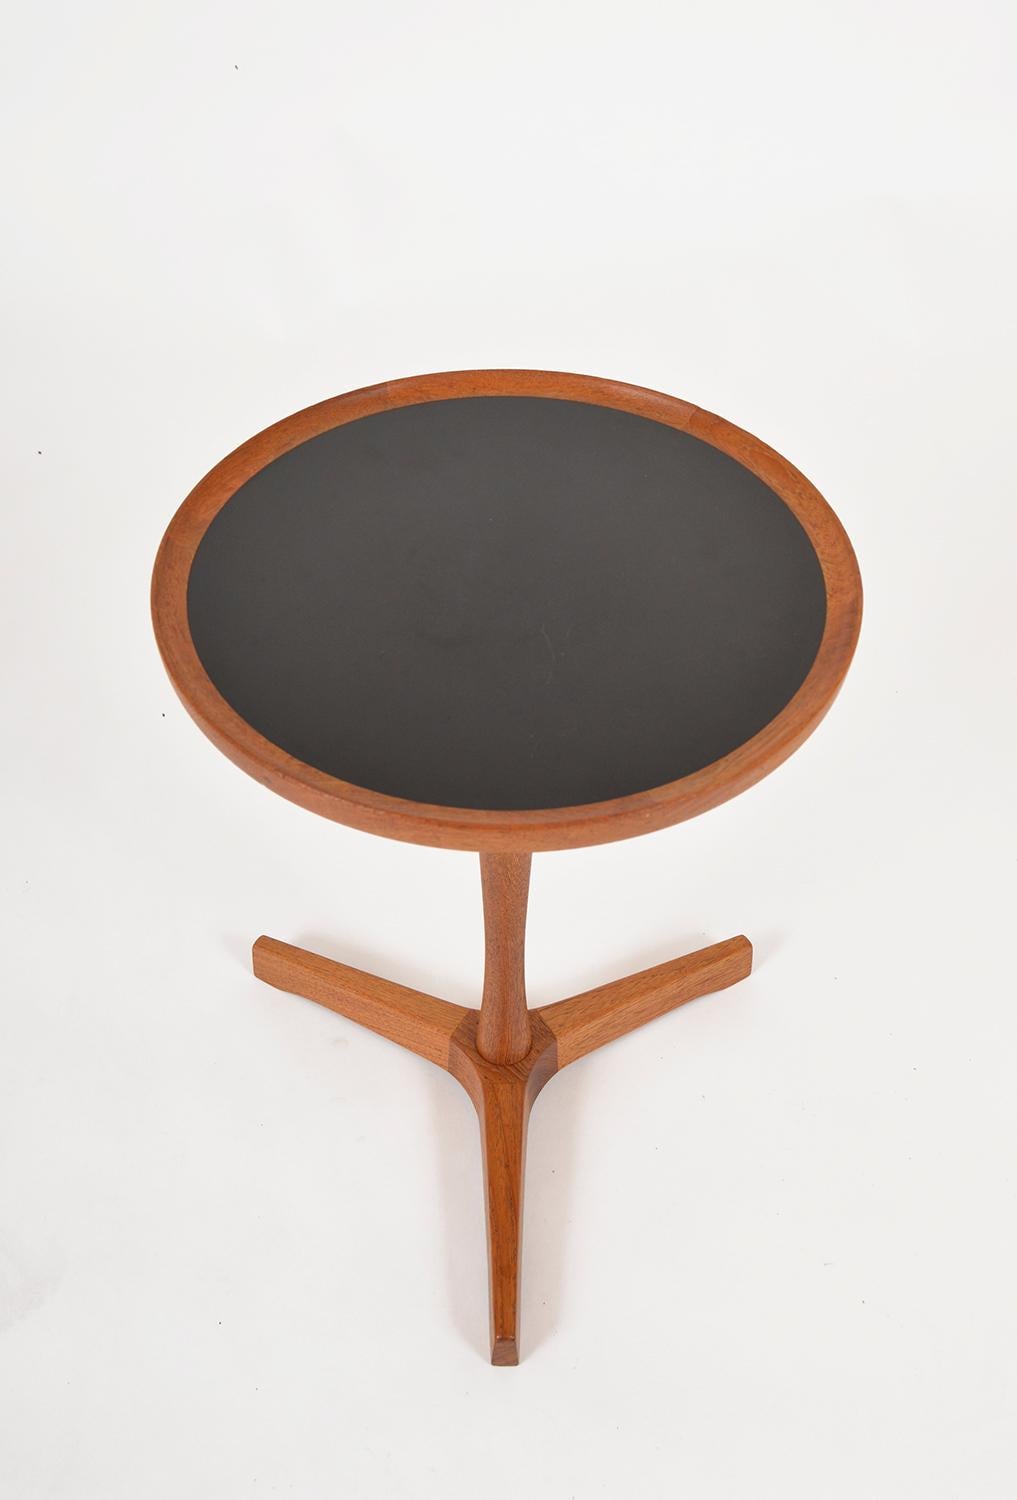 Laminated 1960s Danish Modern Teak Occasional Side Wine Table by Hans C Andersen for Artex For Sale